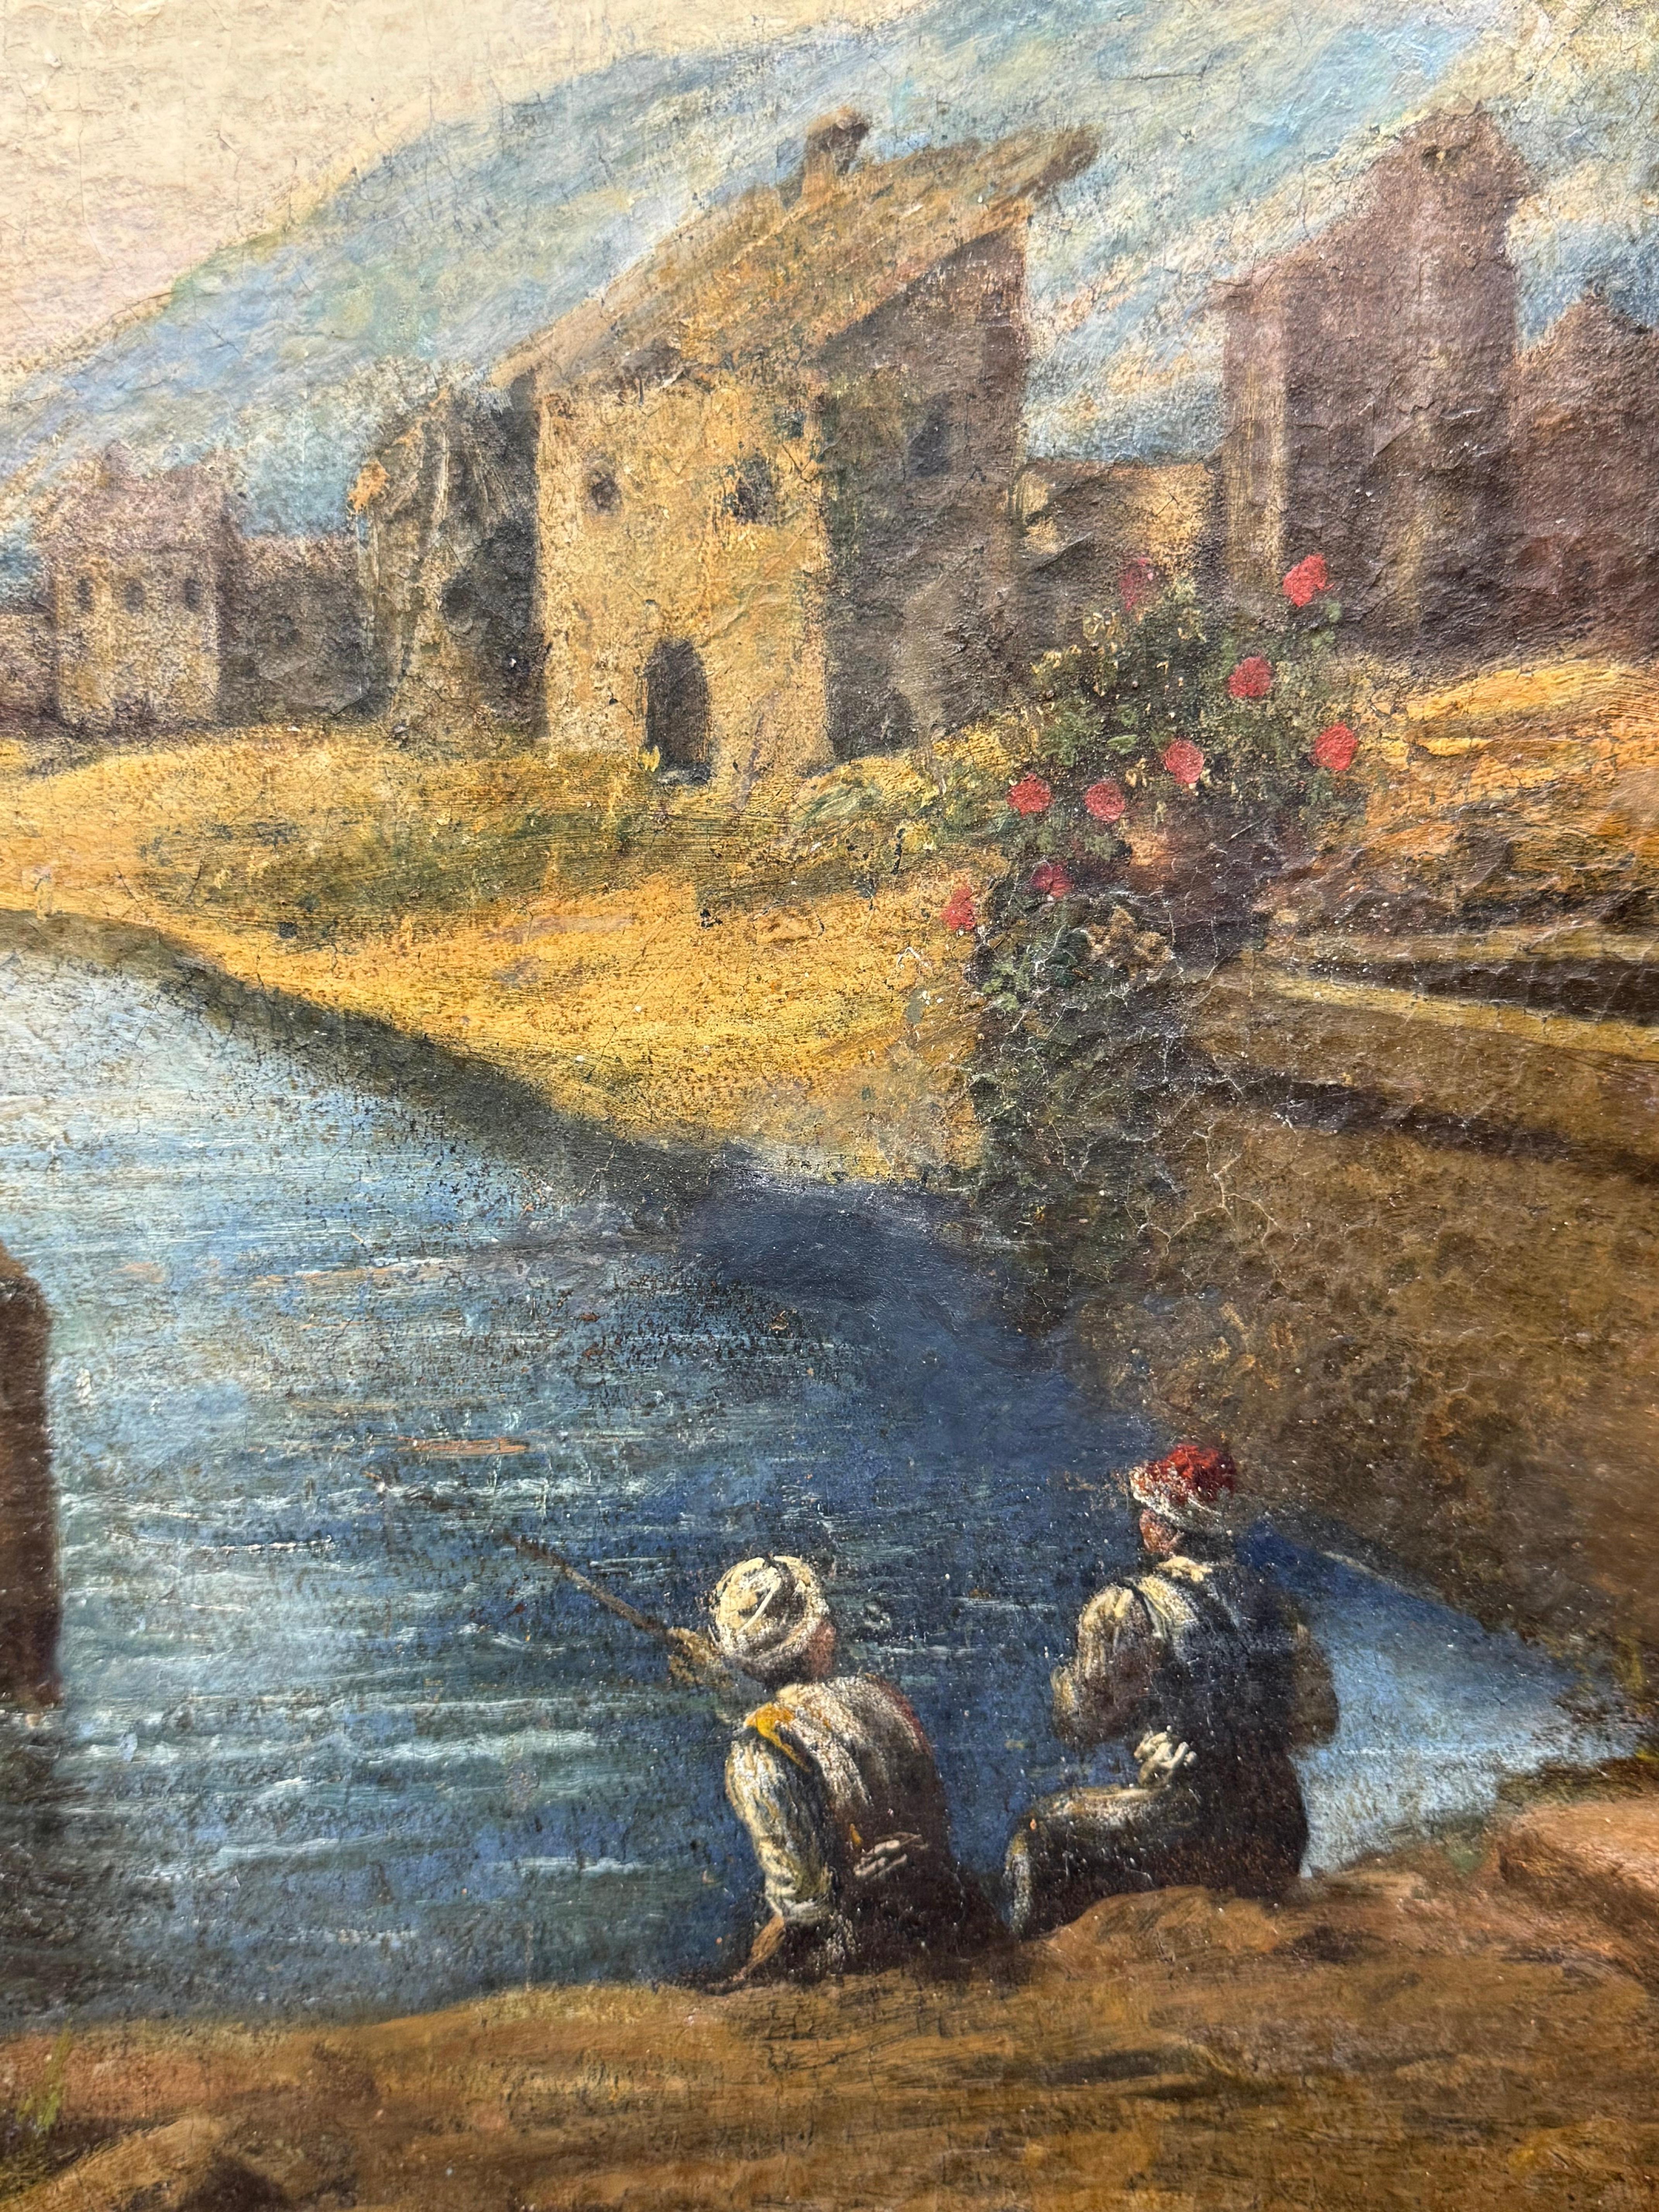 Early 20th century, Italian Mediterranean landscape with two figures fishing

Your visible signature

Oil on canvas

Relined and restored

25.5 x 35 unframed, 31 x 3 9.75 frame